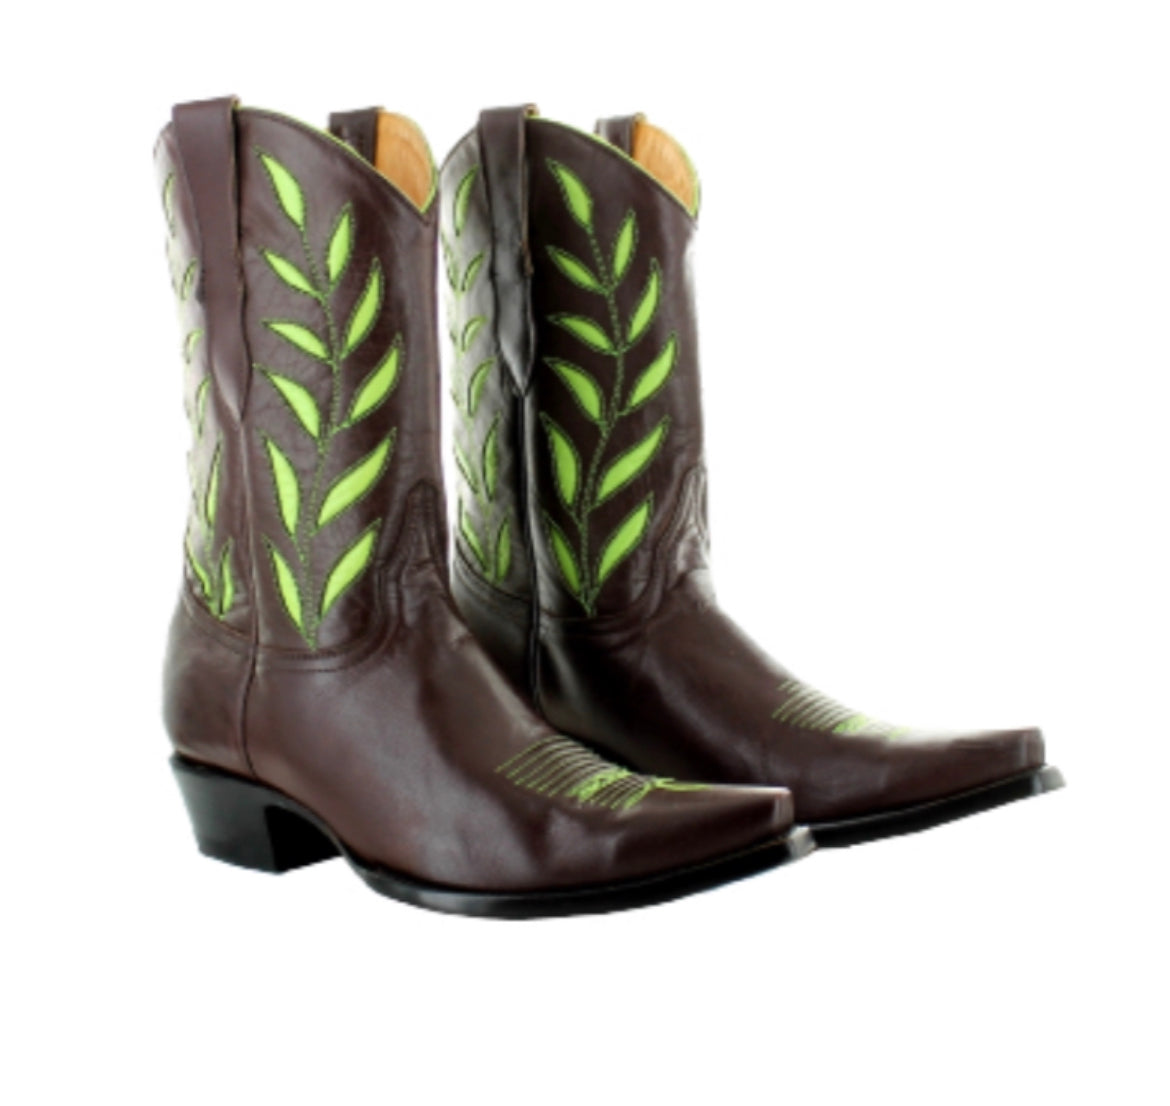 New brown Jessie Western boots with green stitching